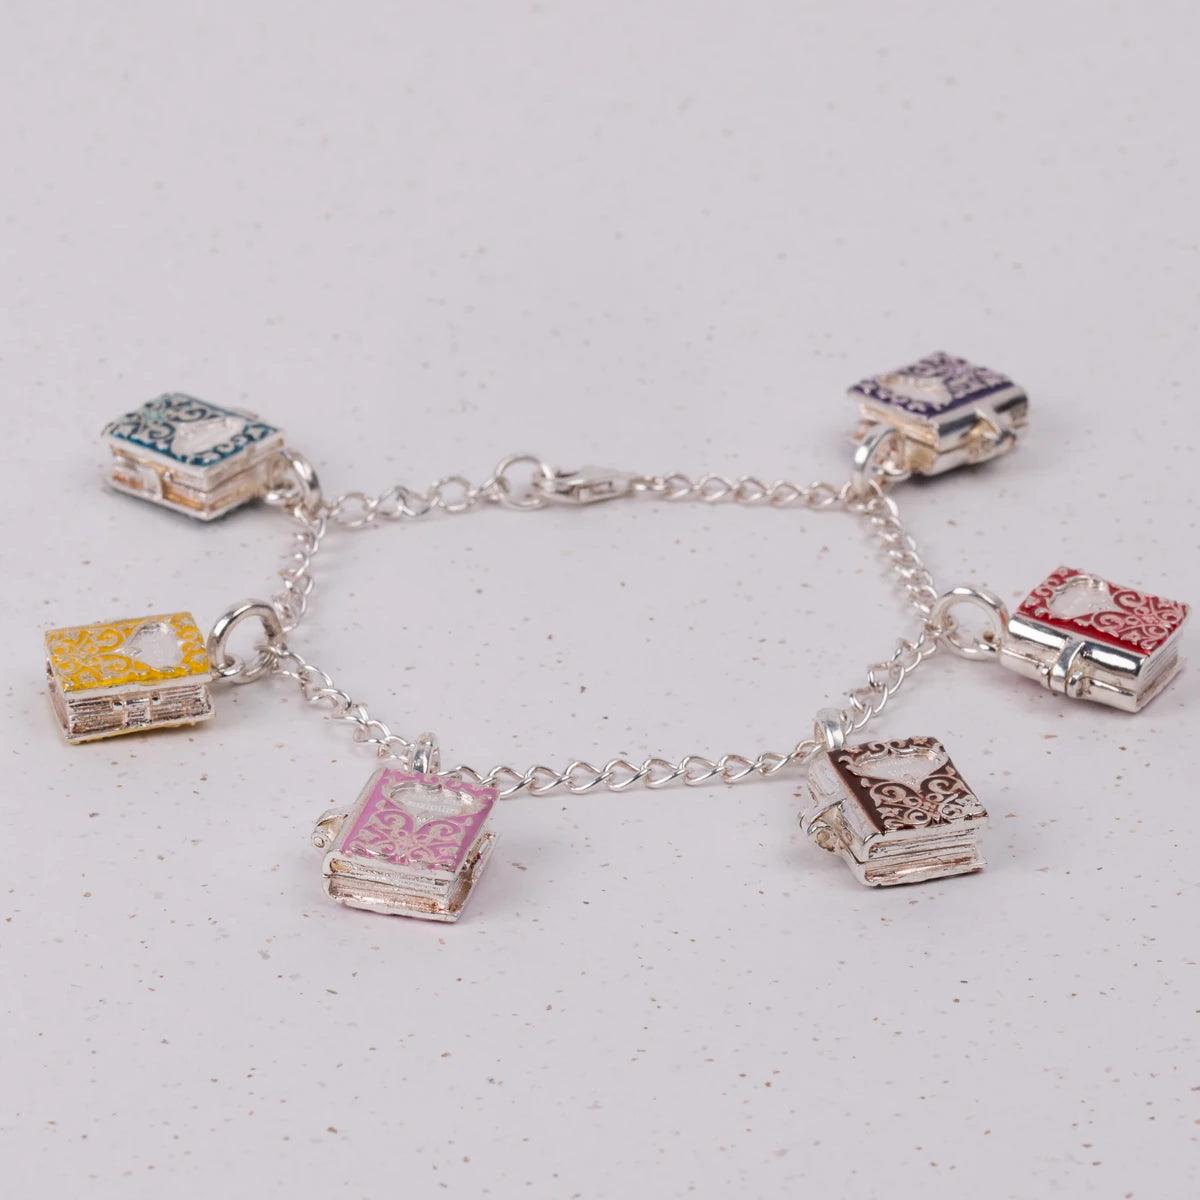 Jane Austen Six Sterling Silver and Email -romans Charm Bracelet | Exclusieve verzameling